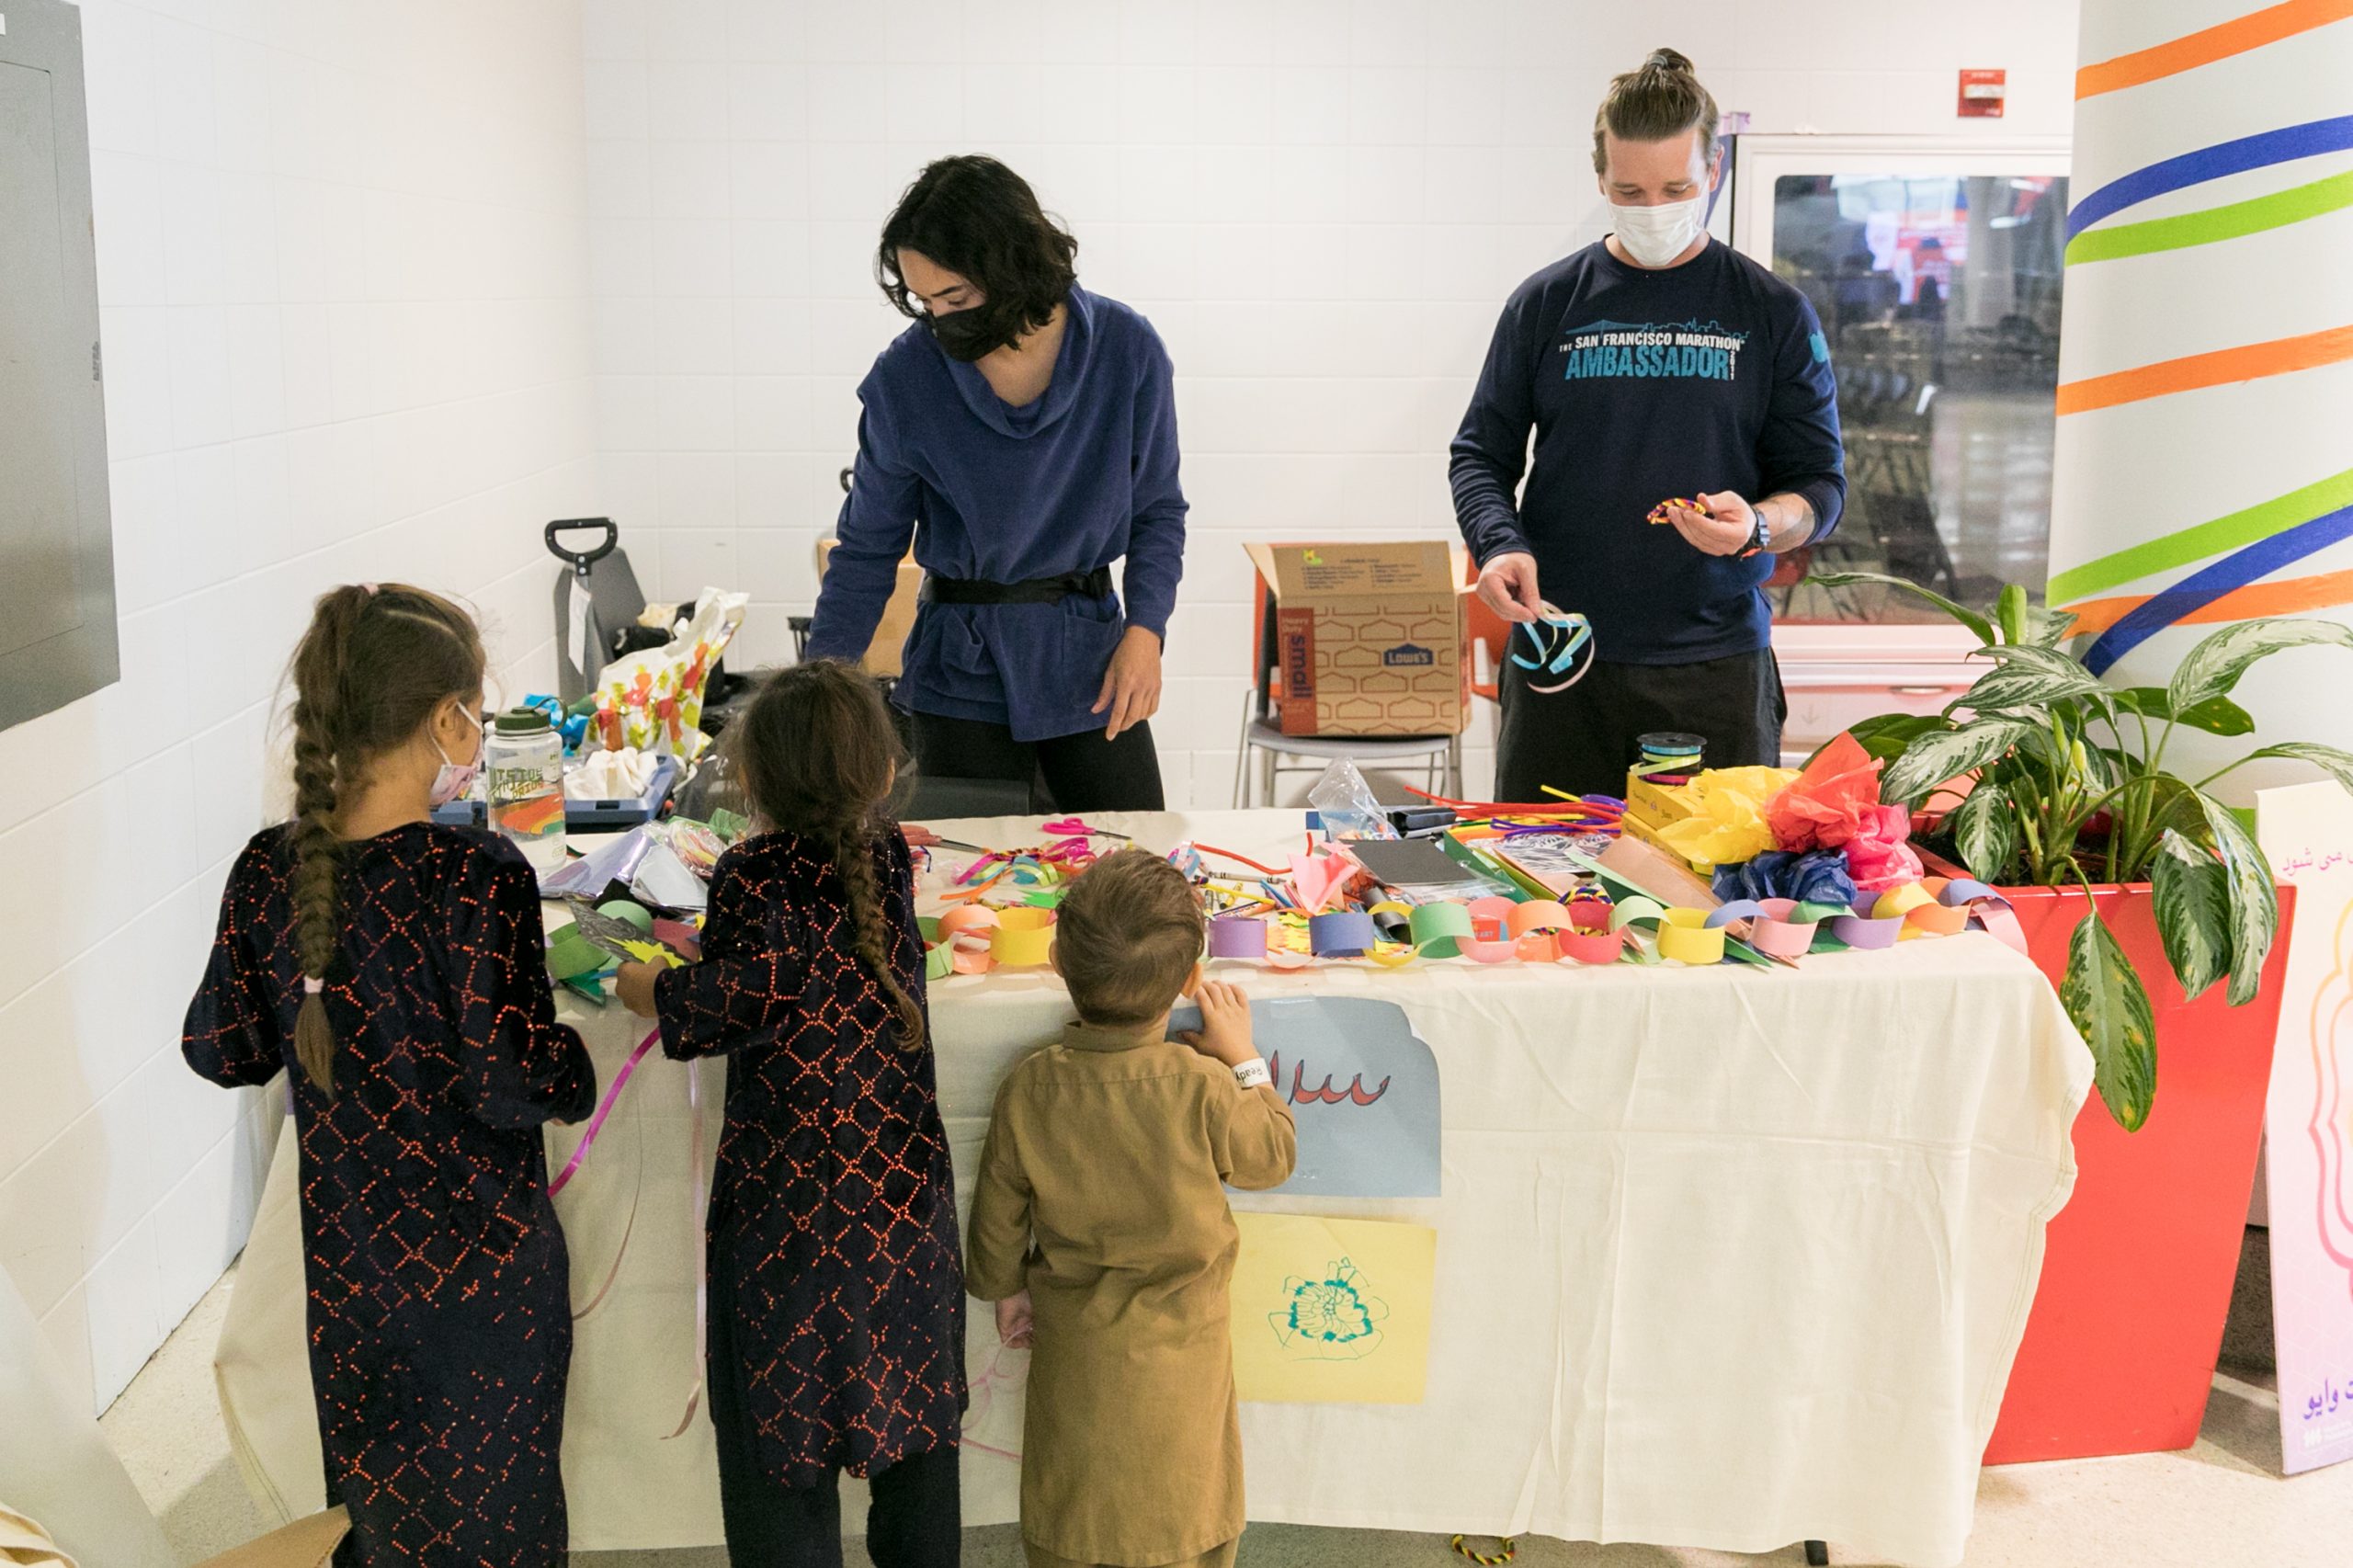 Two volunteers stand behind a table full of crafts in a corner of the airport, interacting with three children of various ages.